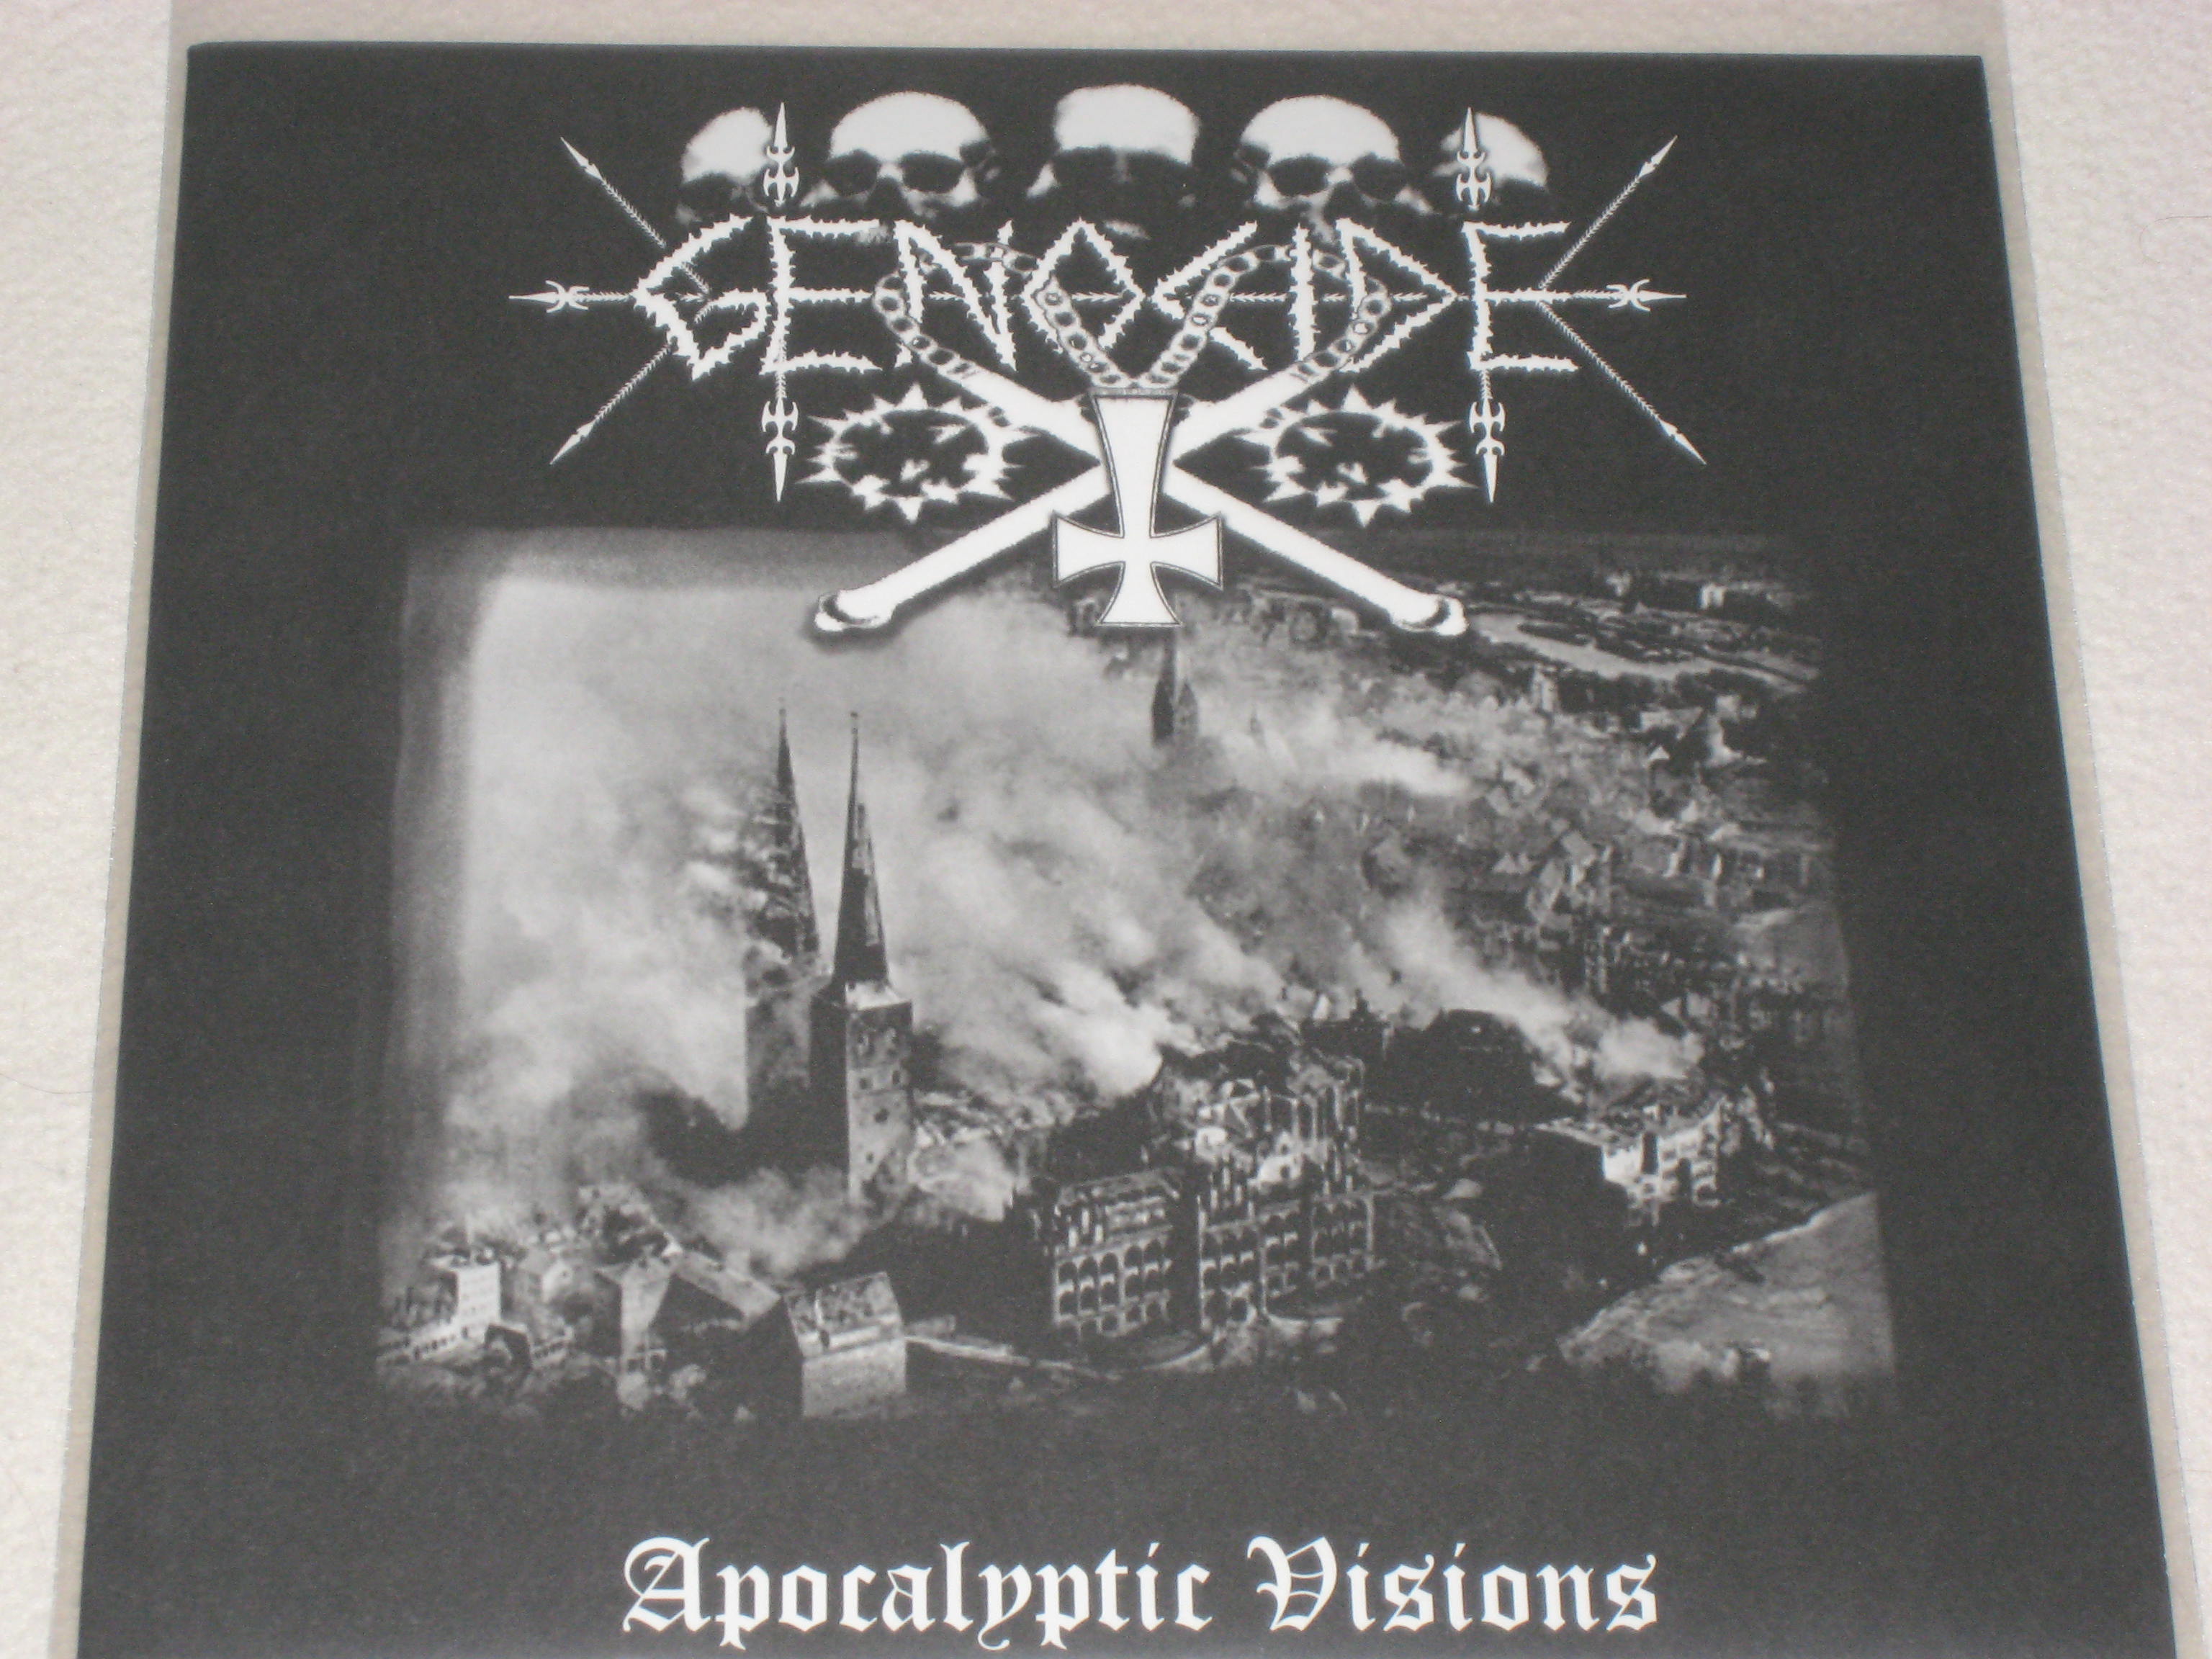 Genocide(Ger) - Apocalyptic Visions LP